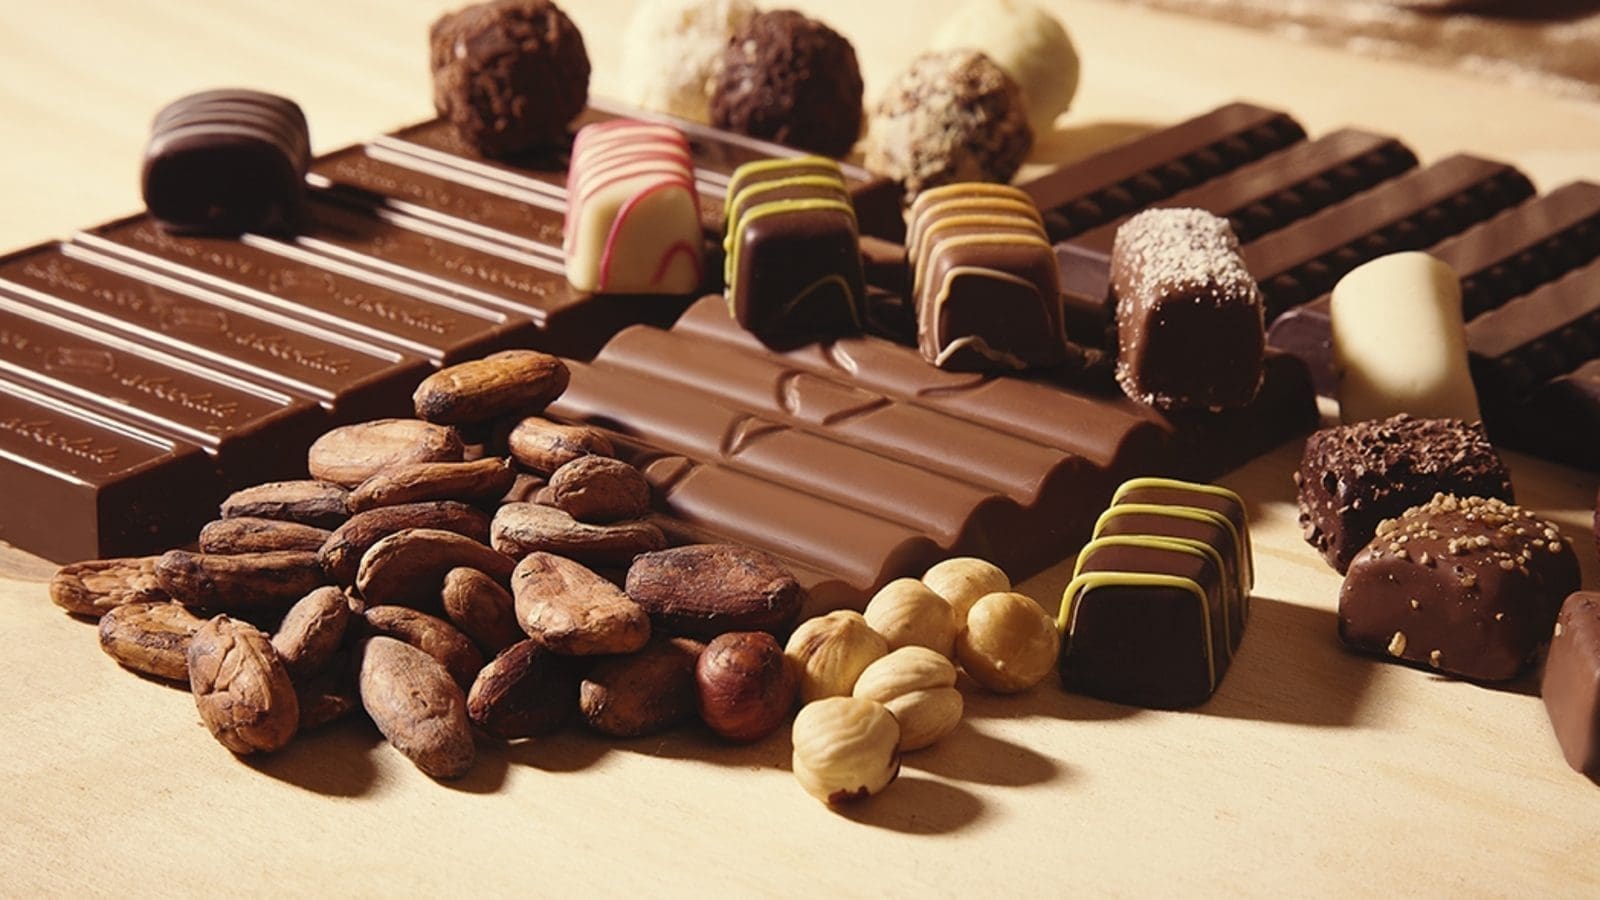 Private-equity firm CapVest acquires chocolate-maker Natra